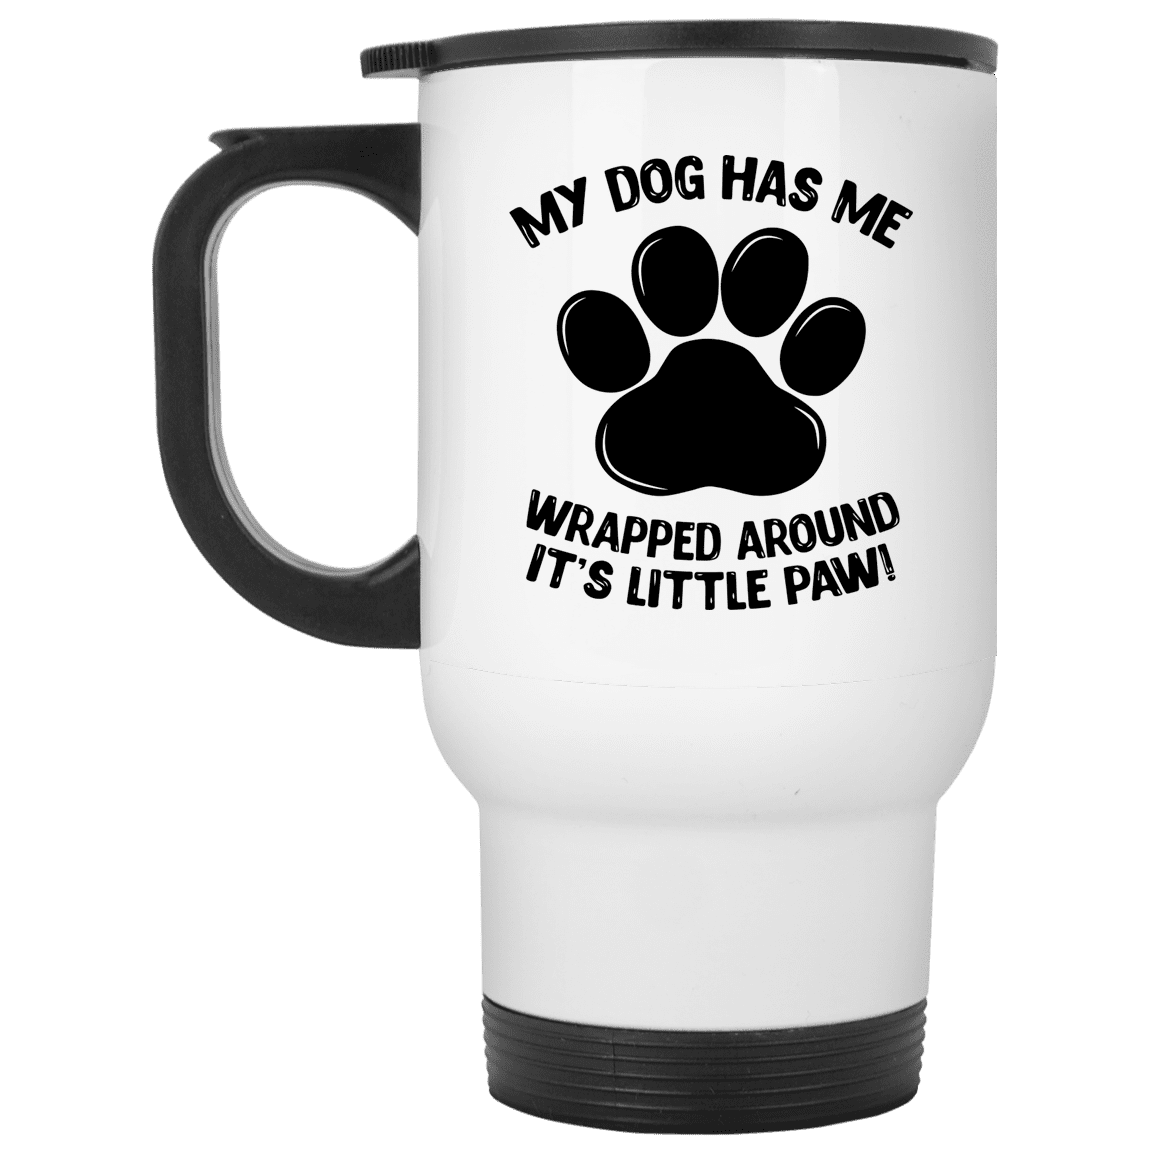 My Dog Has Me Wrapped Around It's Little Paw - Mugs.